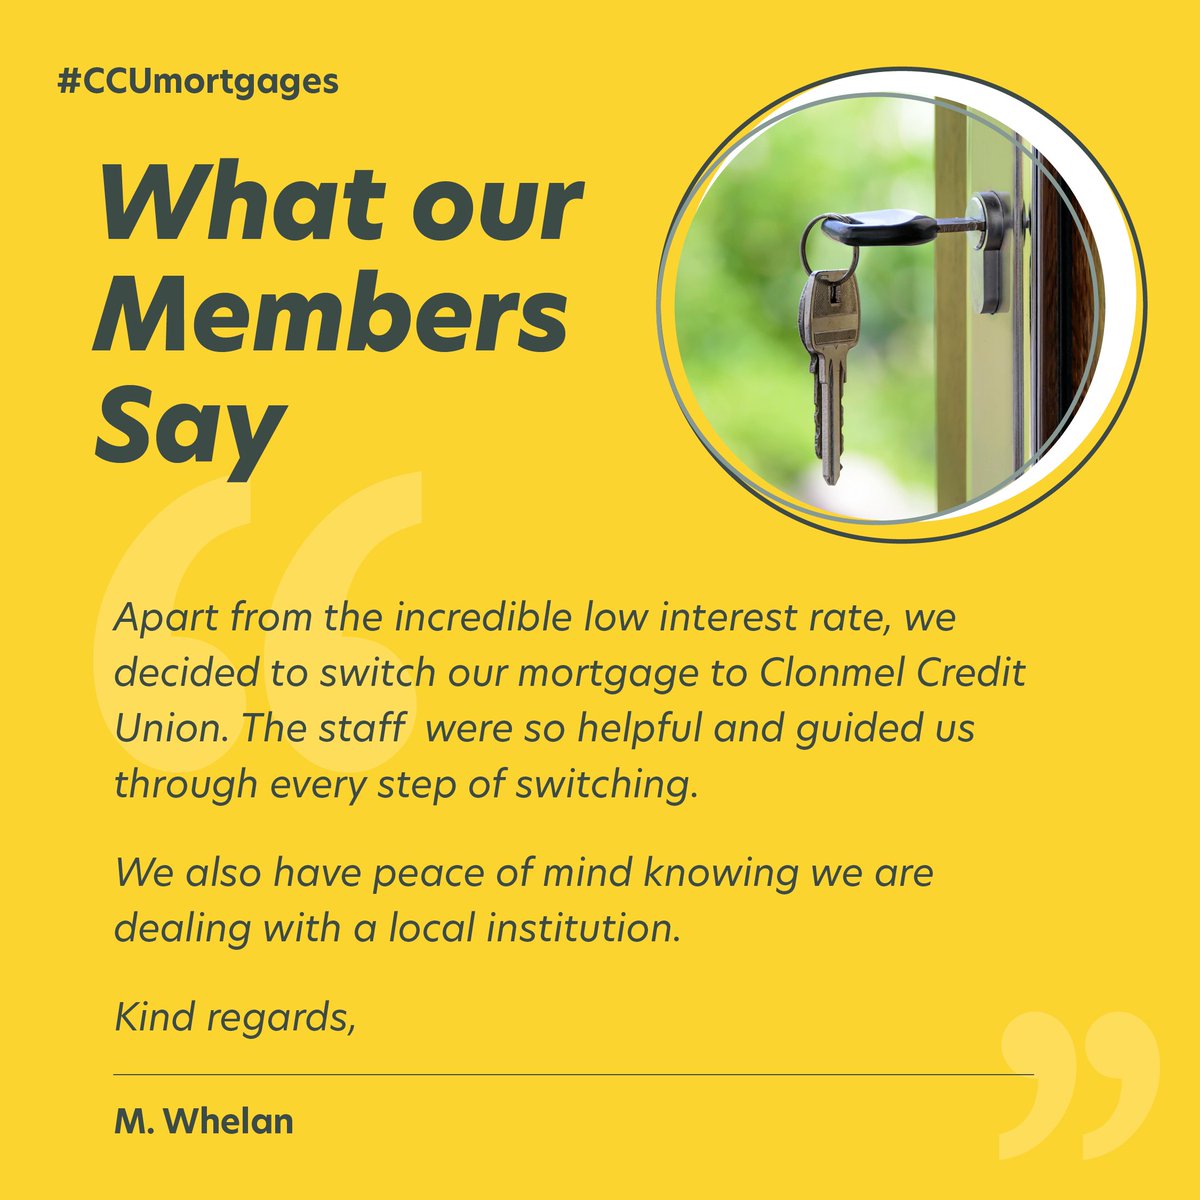 Real stories from real members! 

We were delighted to be able to assist M. Whelan on his journey to his dream home! We are wishing you the lifetime of happiness in you new house. 

#CCUmortgages #testimonial  #mortgageadvice #homeloan #mortgage #positivefeedback #AskAudrey